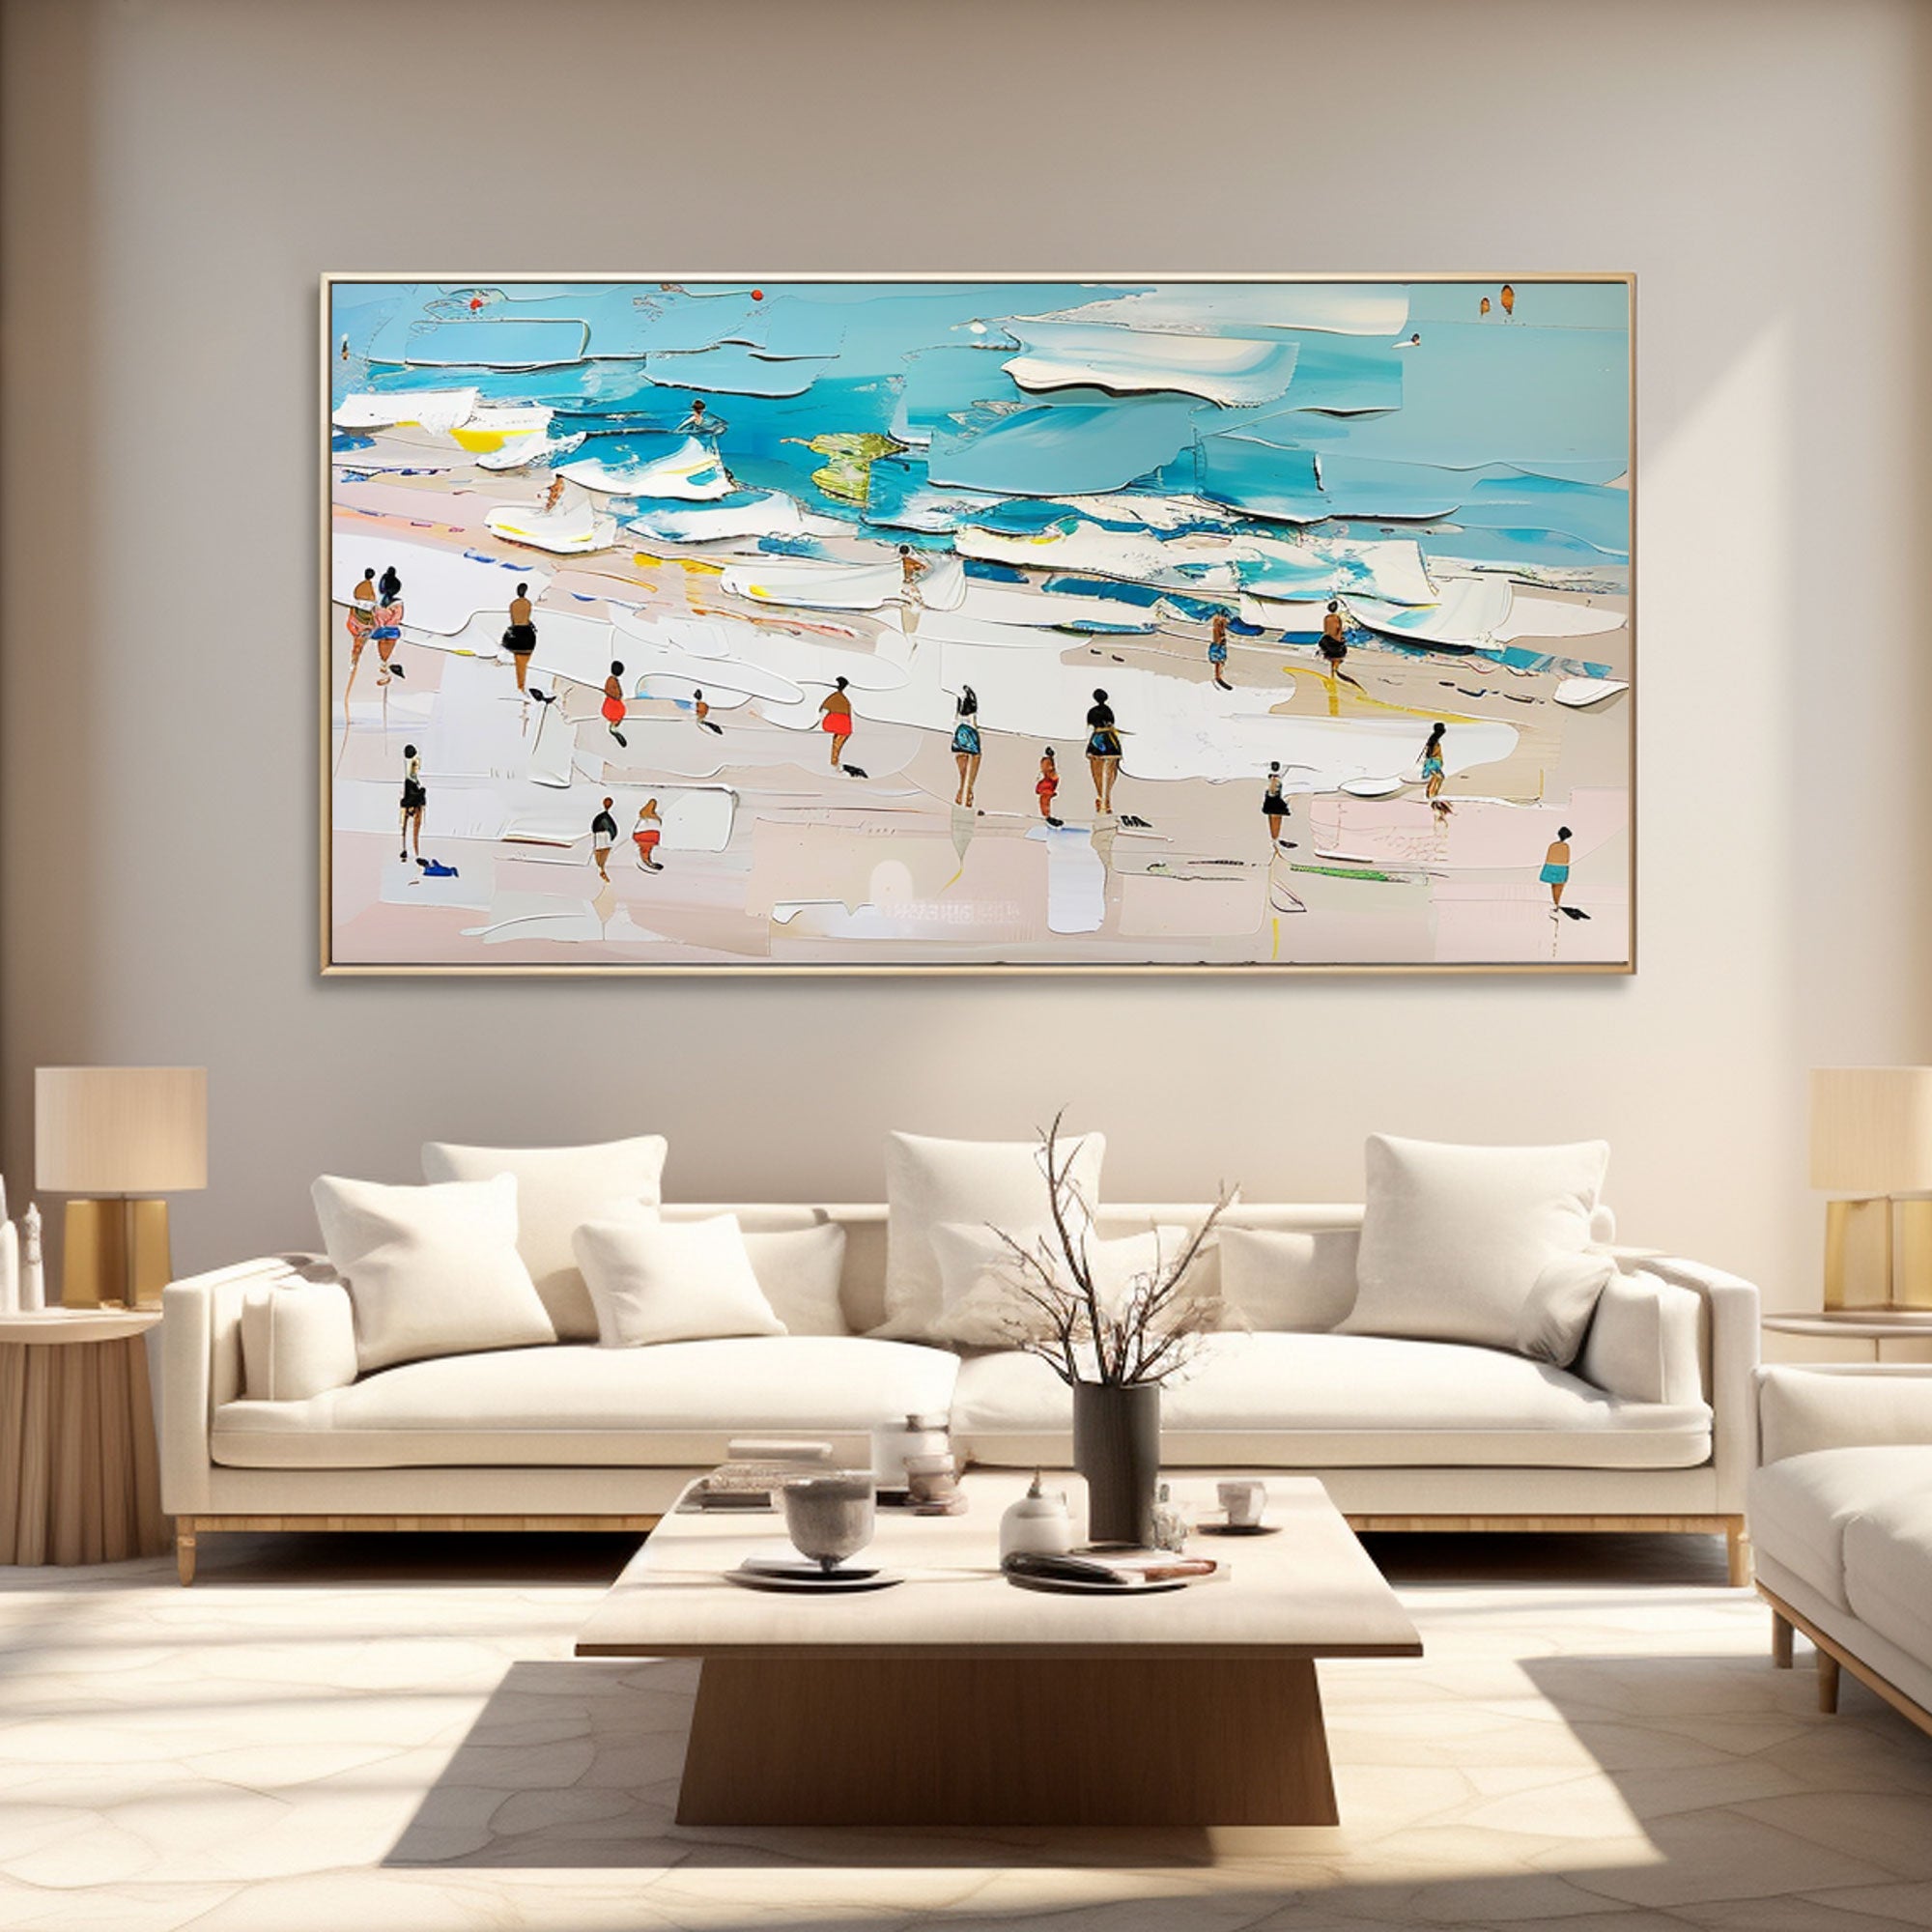 3D Textured Colorful Abstract Art Painting "Beach Day"